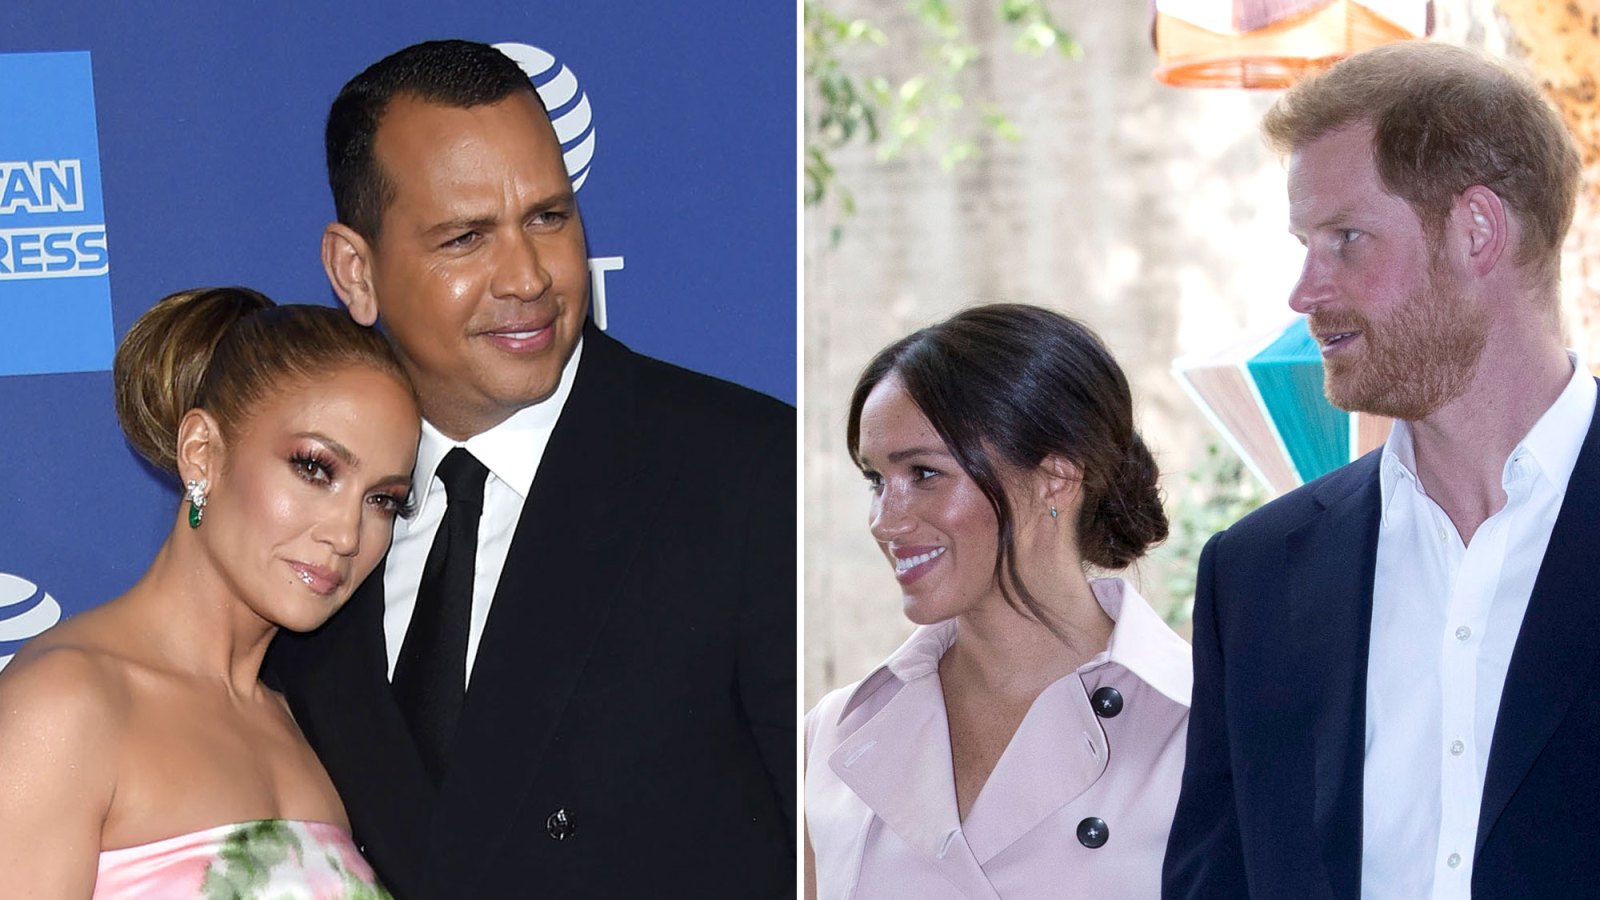 Alex Rodriguez Plays Coy About Double Date With Prince Harry, Meghan Markle